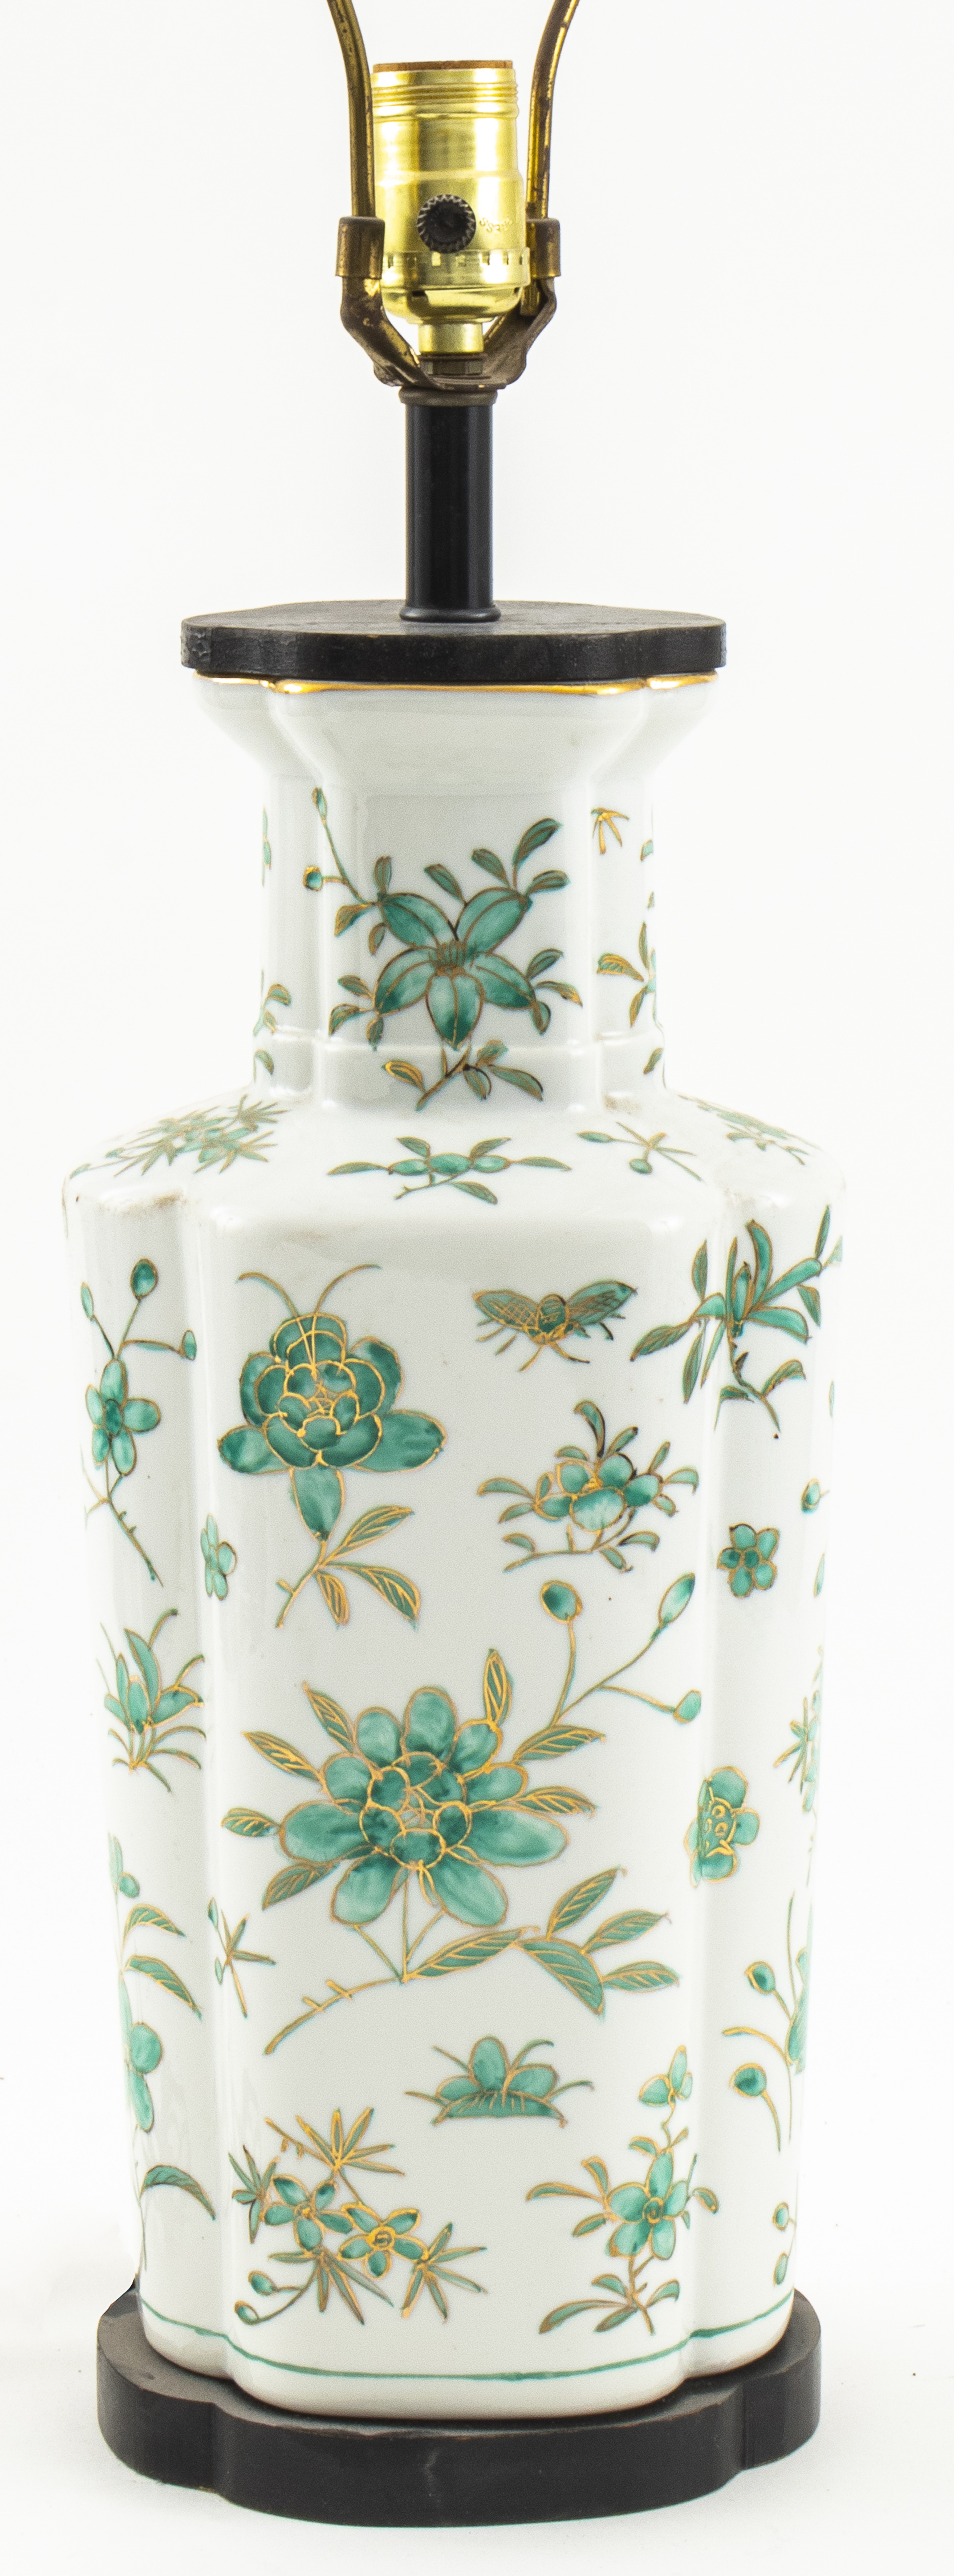 CHINESE PORCELAIN FLORAL TABLE 3c46ce